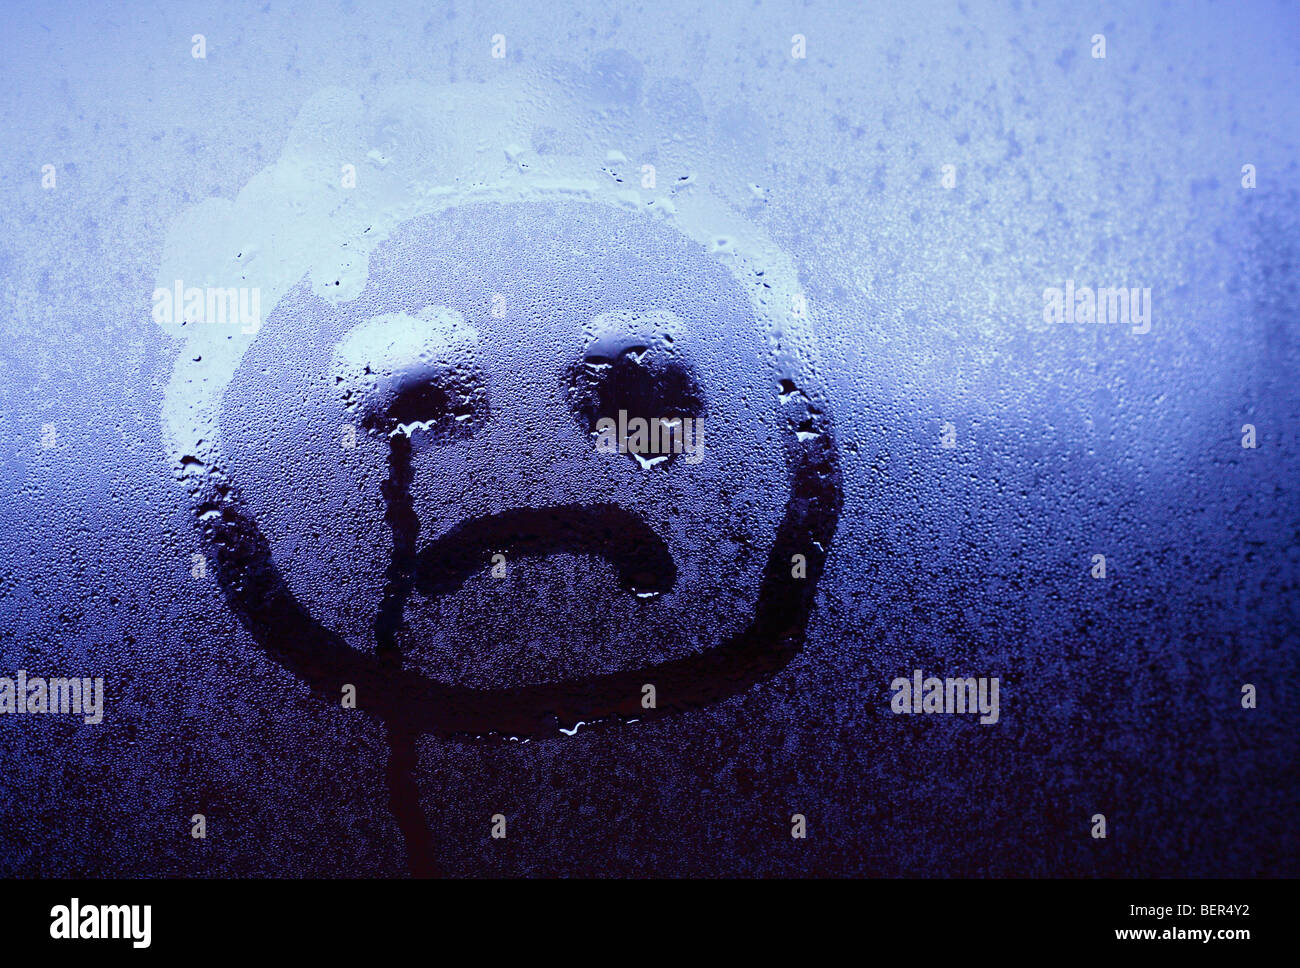 An unhappy childlike face drawn onto window condensation. Stock Photo